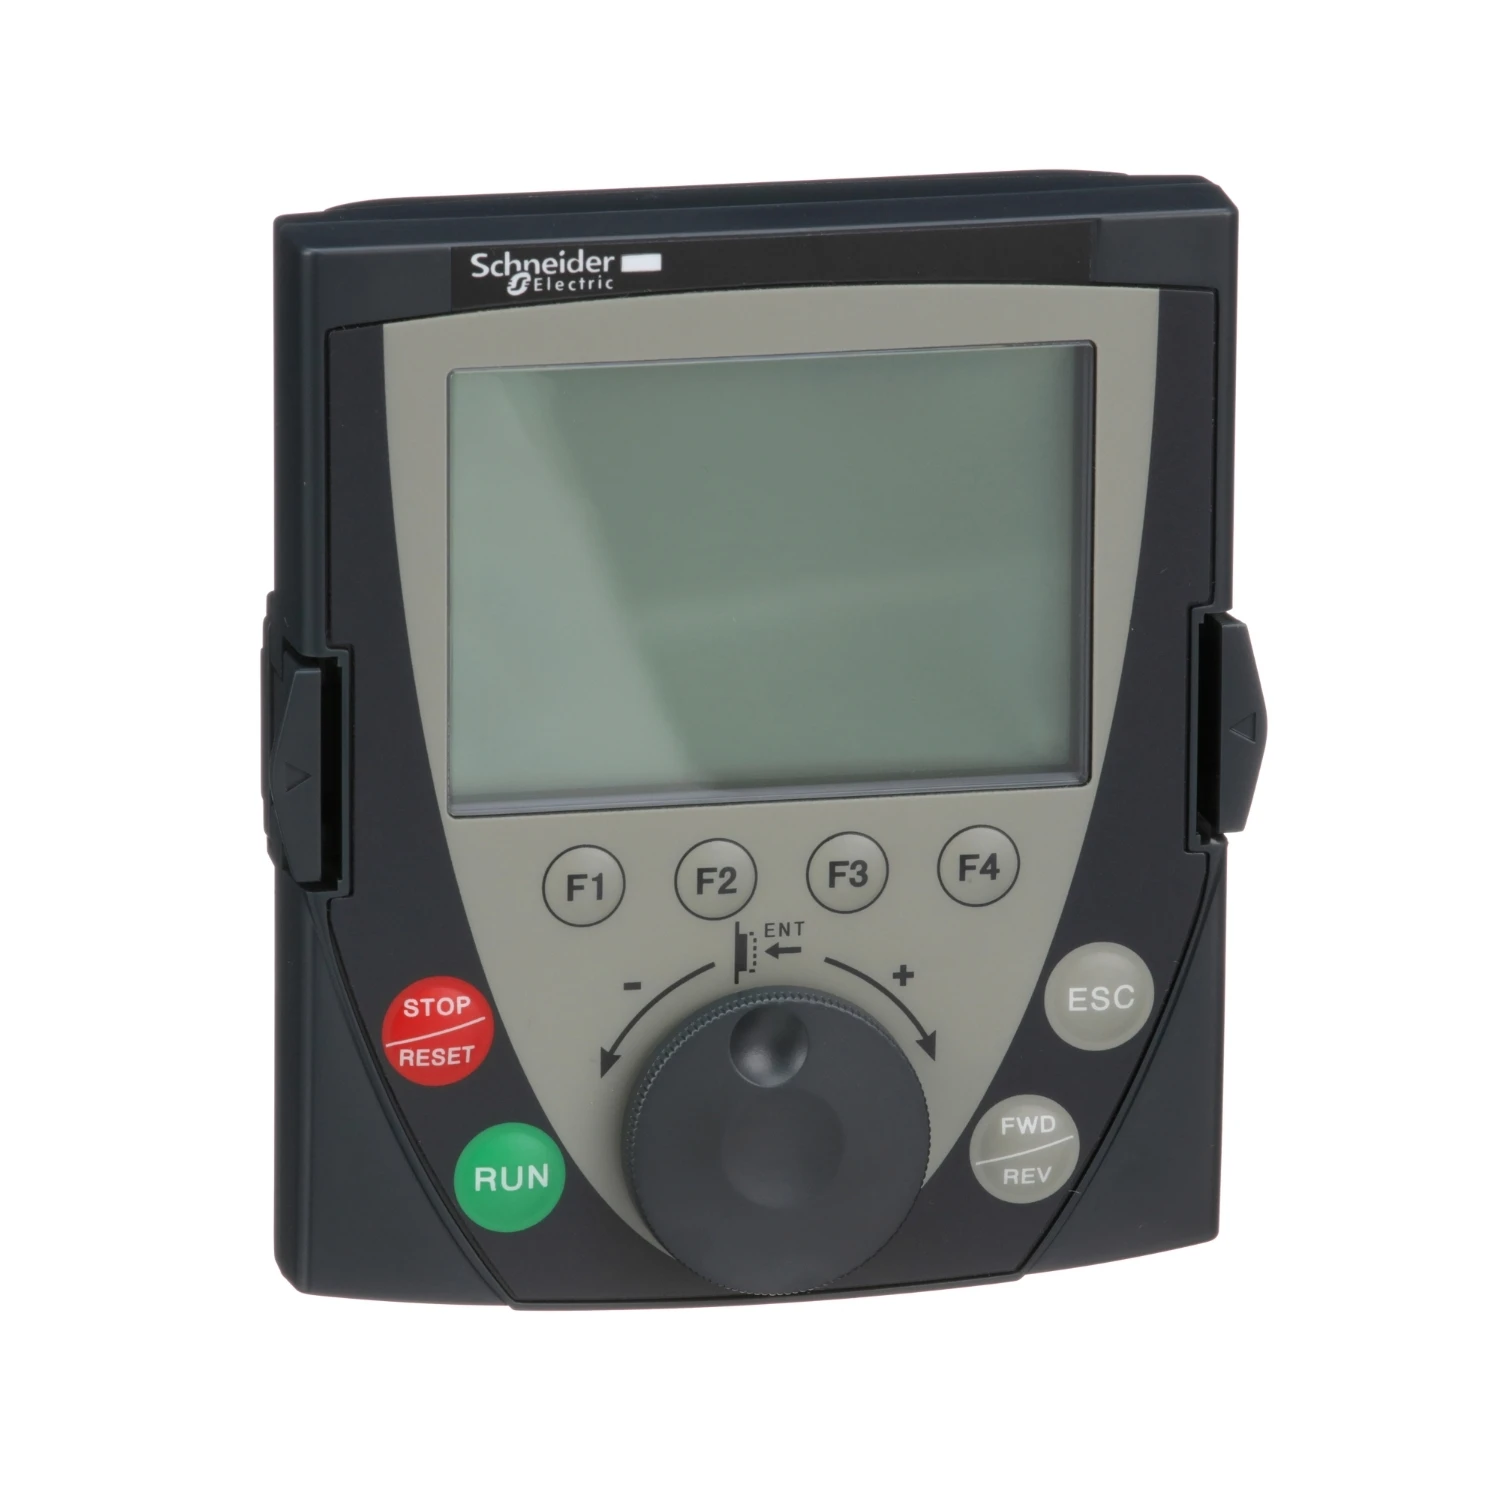 VW3A1101 Remote Graphic Display Terminal For Schneider Electric